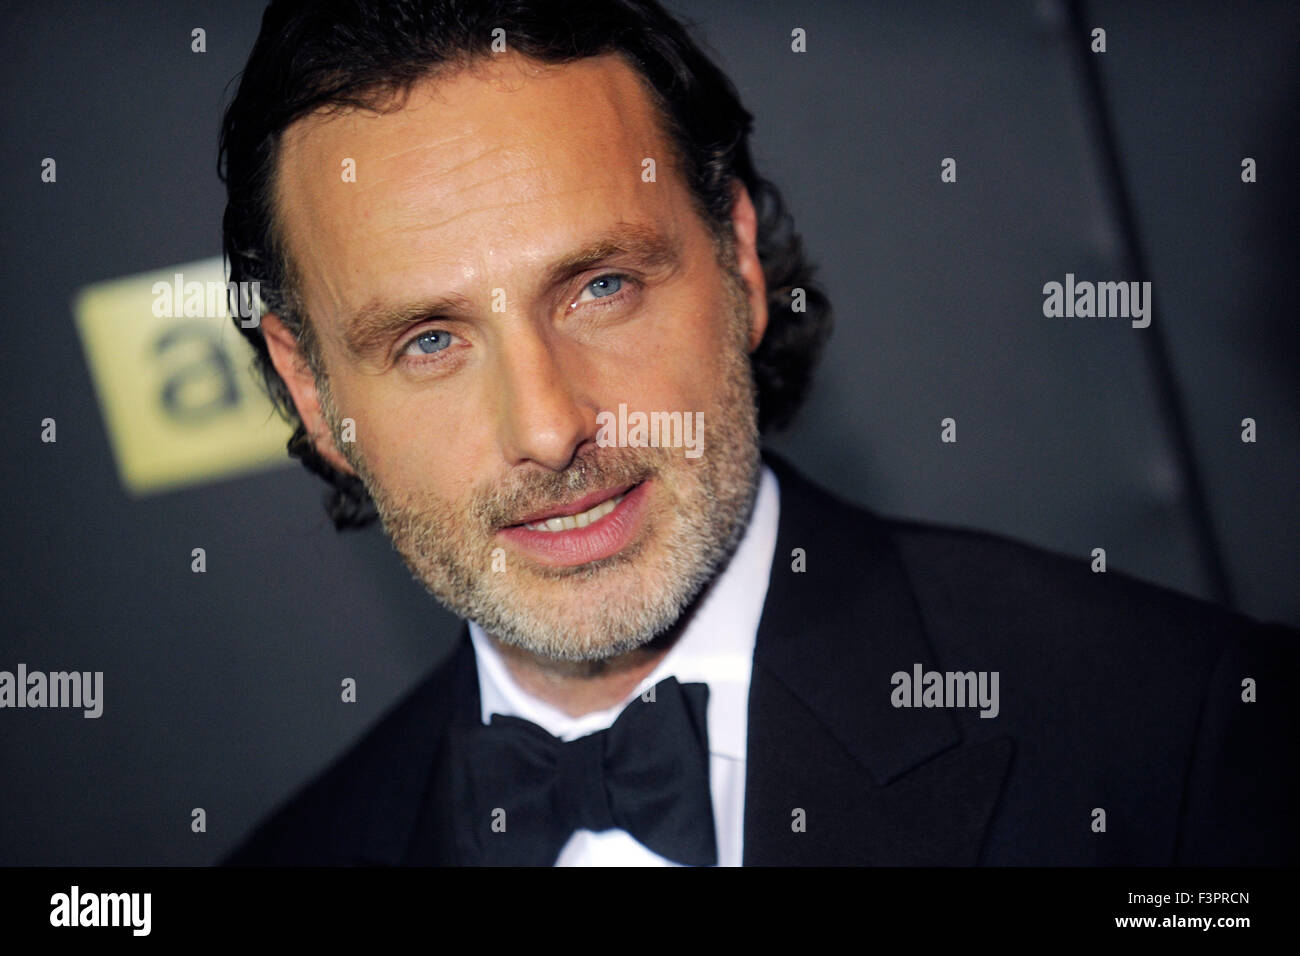 New York City. 9th Oct, 2015. Andrew Lincoln attends AMC's 'The Walking Dead' Season 6 Fan Premiere Event 2015 at Madison Square Garden on October 9, 2015 in New York City. © dpa/Alamy Live News Stock Photo